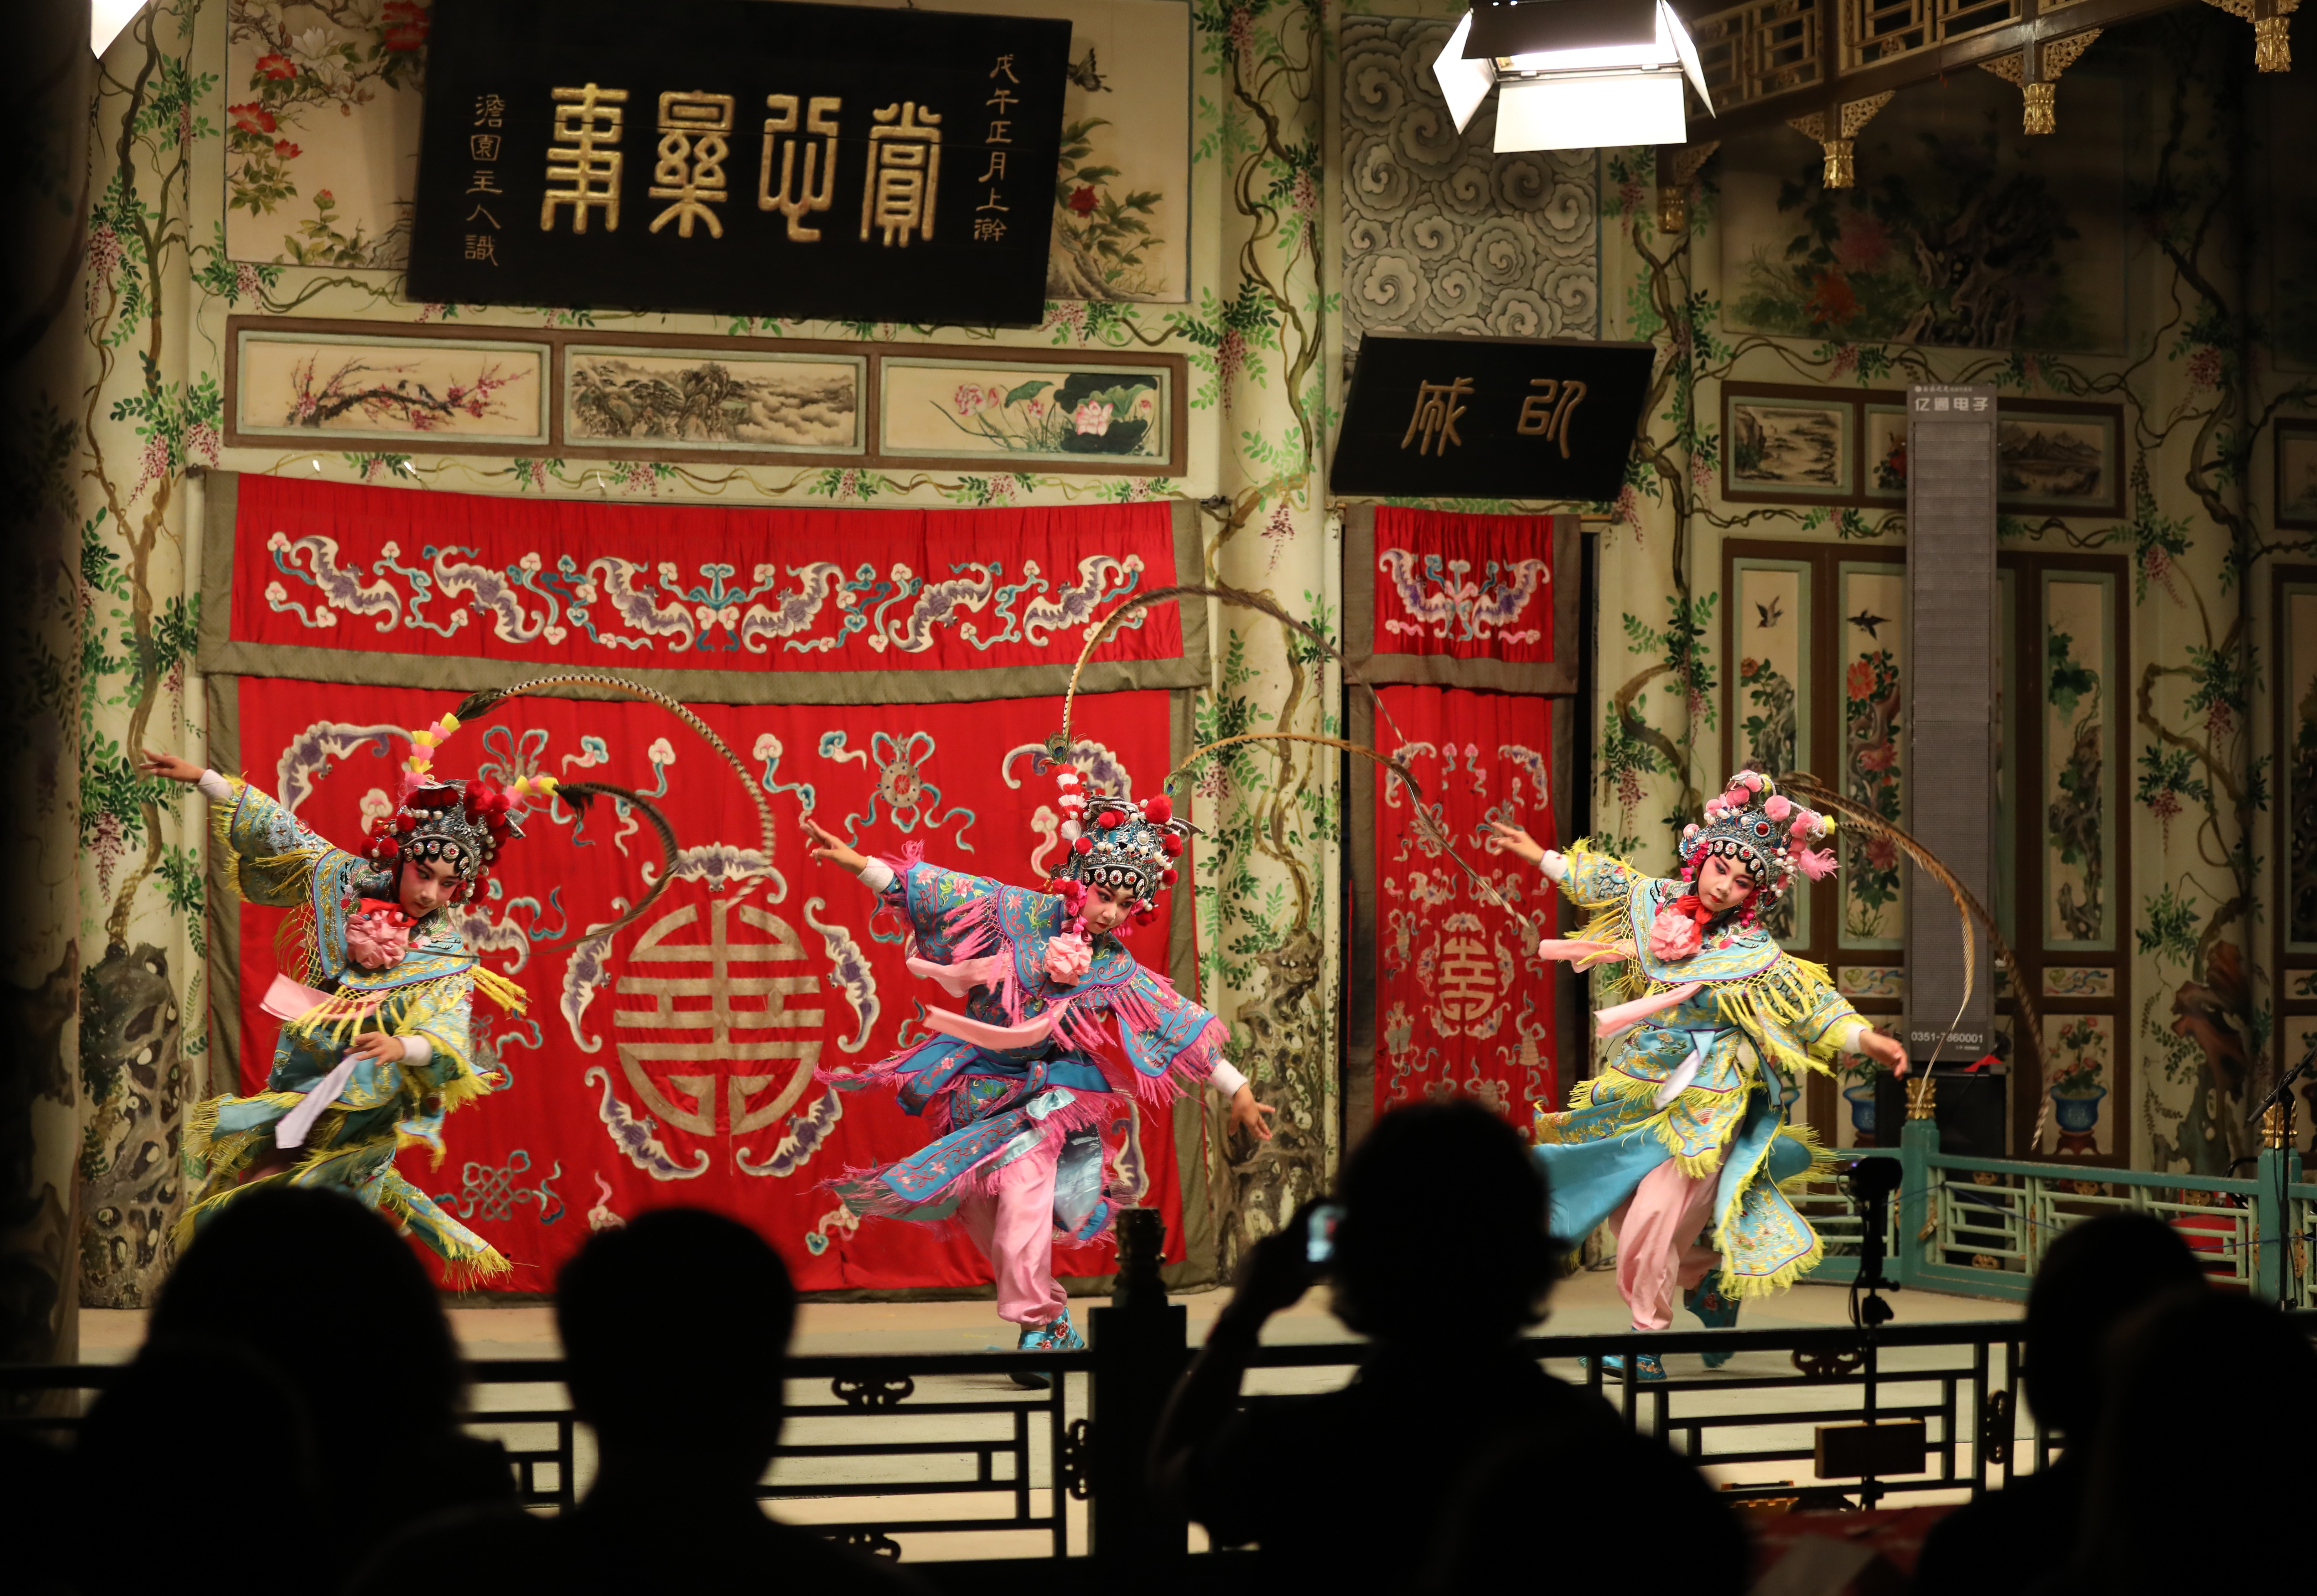 Dancers perform on the historic stage.